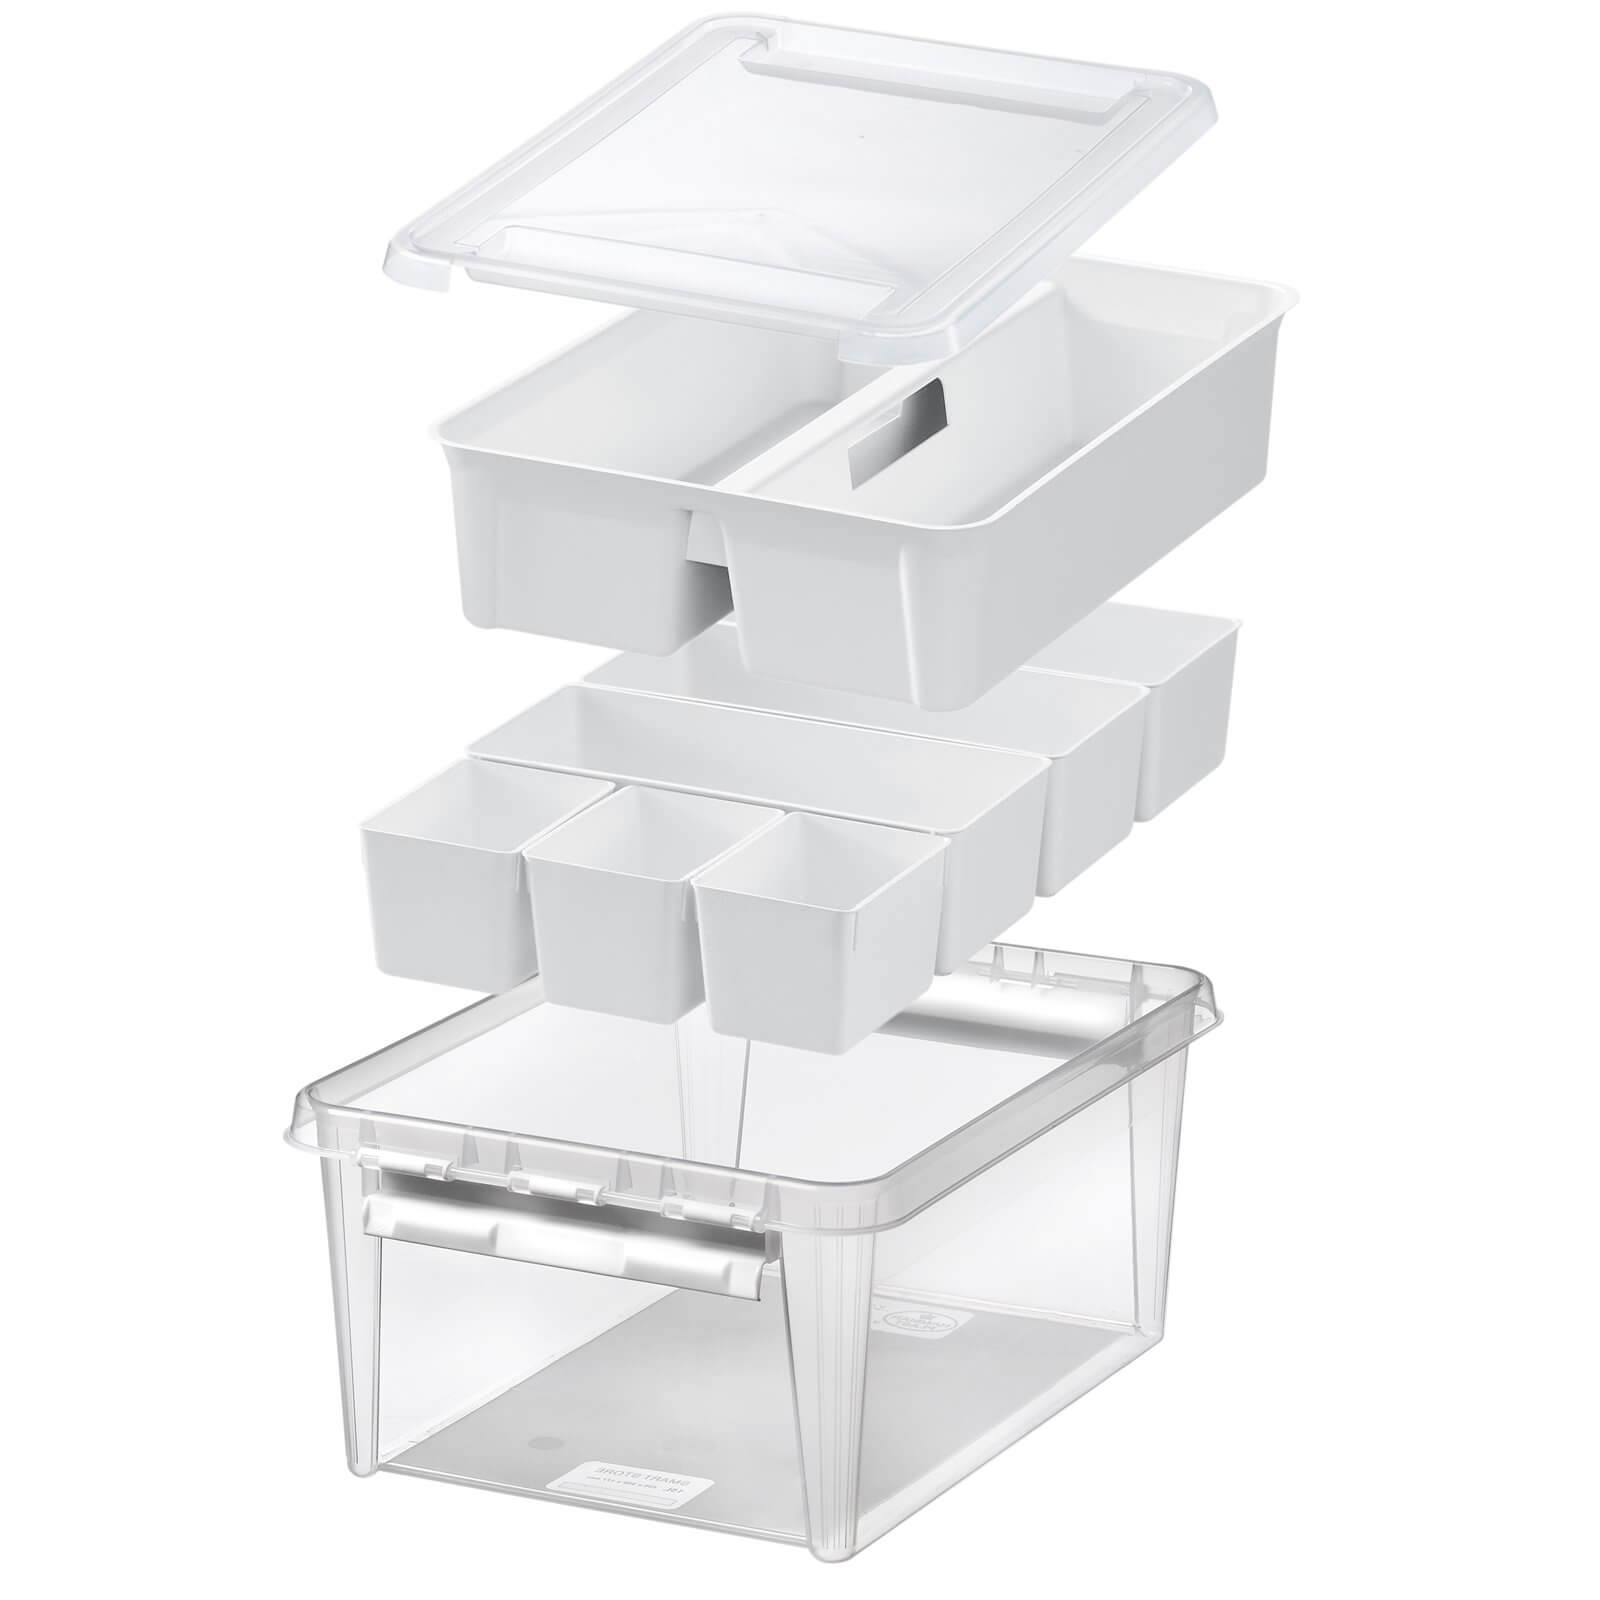 SmartStore Home Storage Box 15 with Inserts